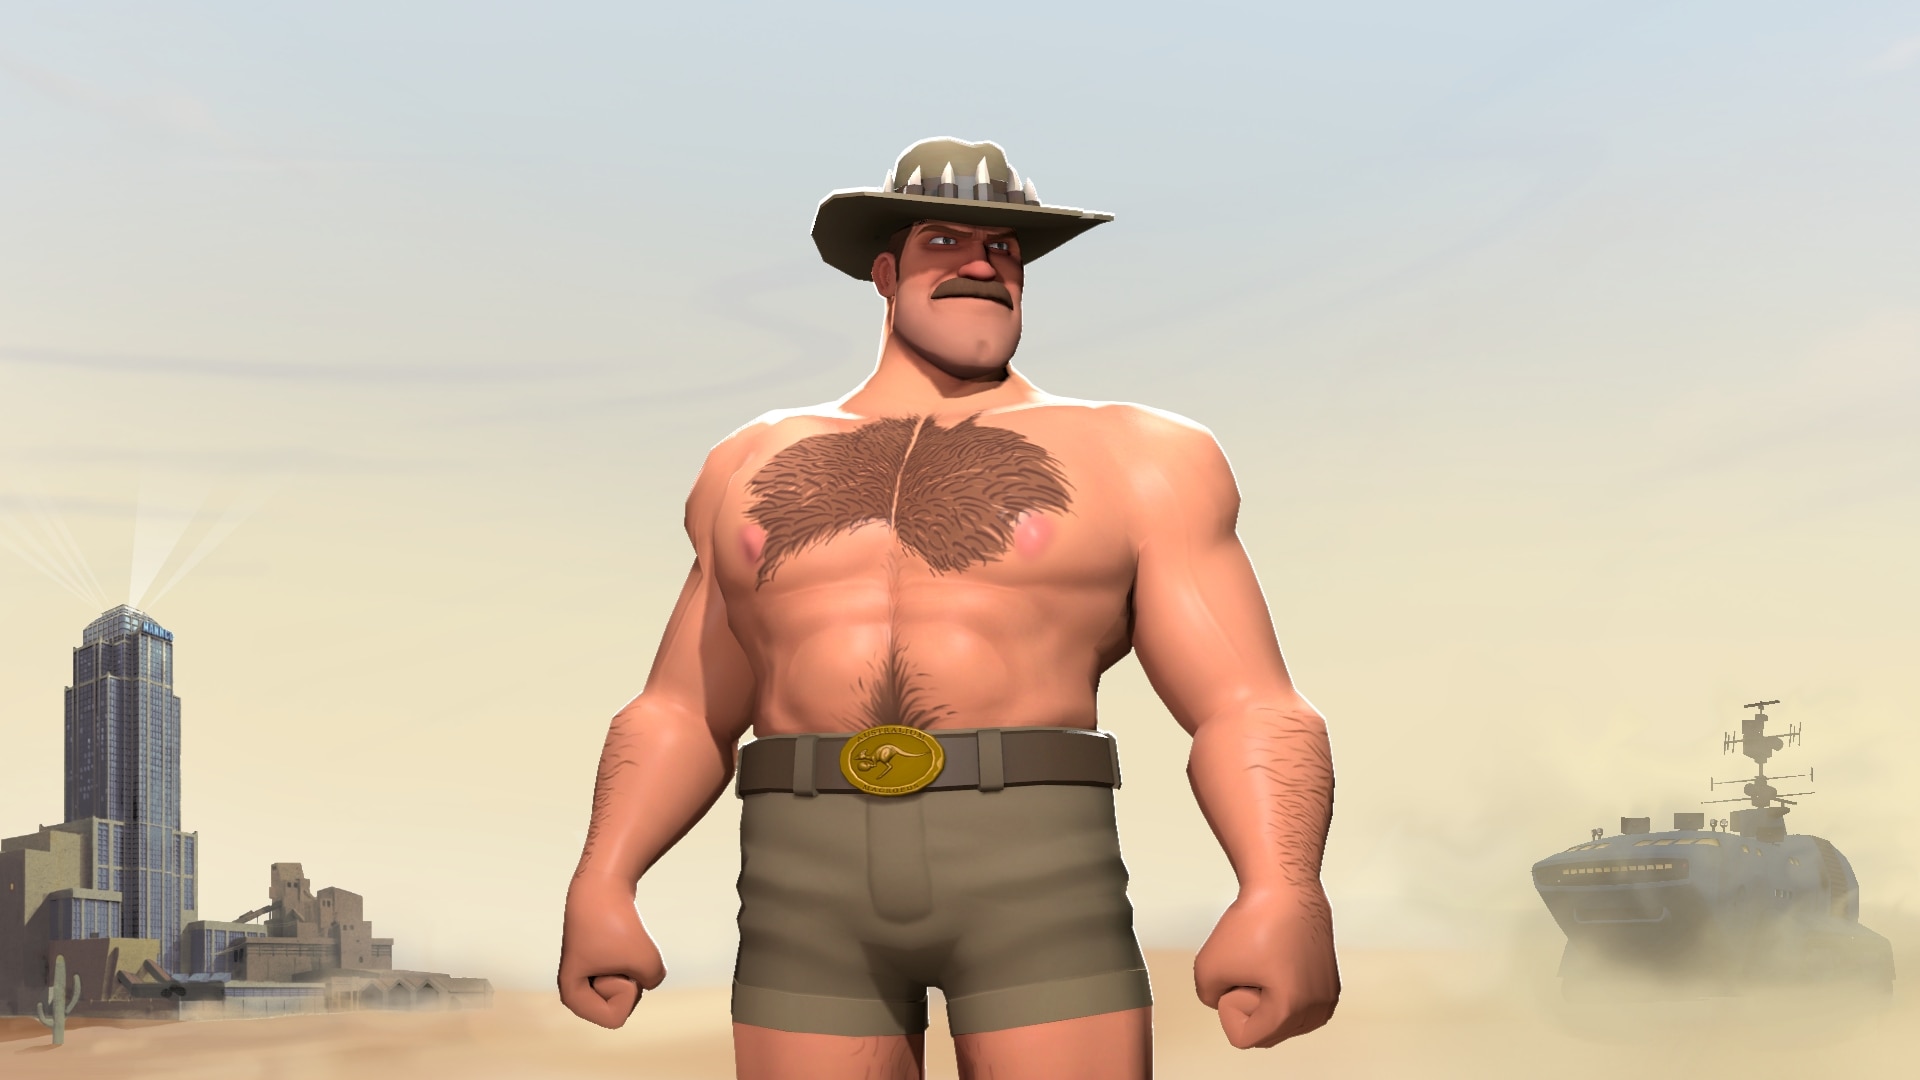 VSH makes a rocky official debut in Team Fortress 2